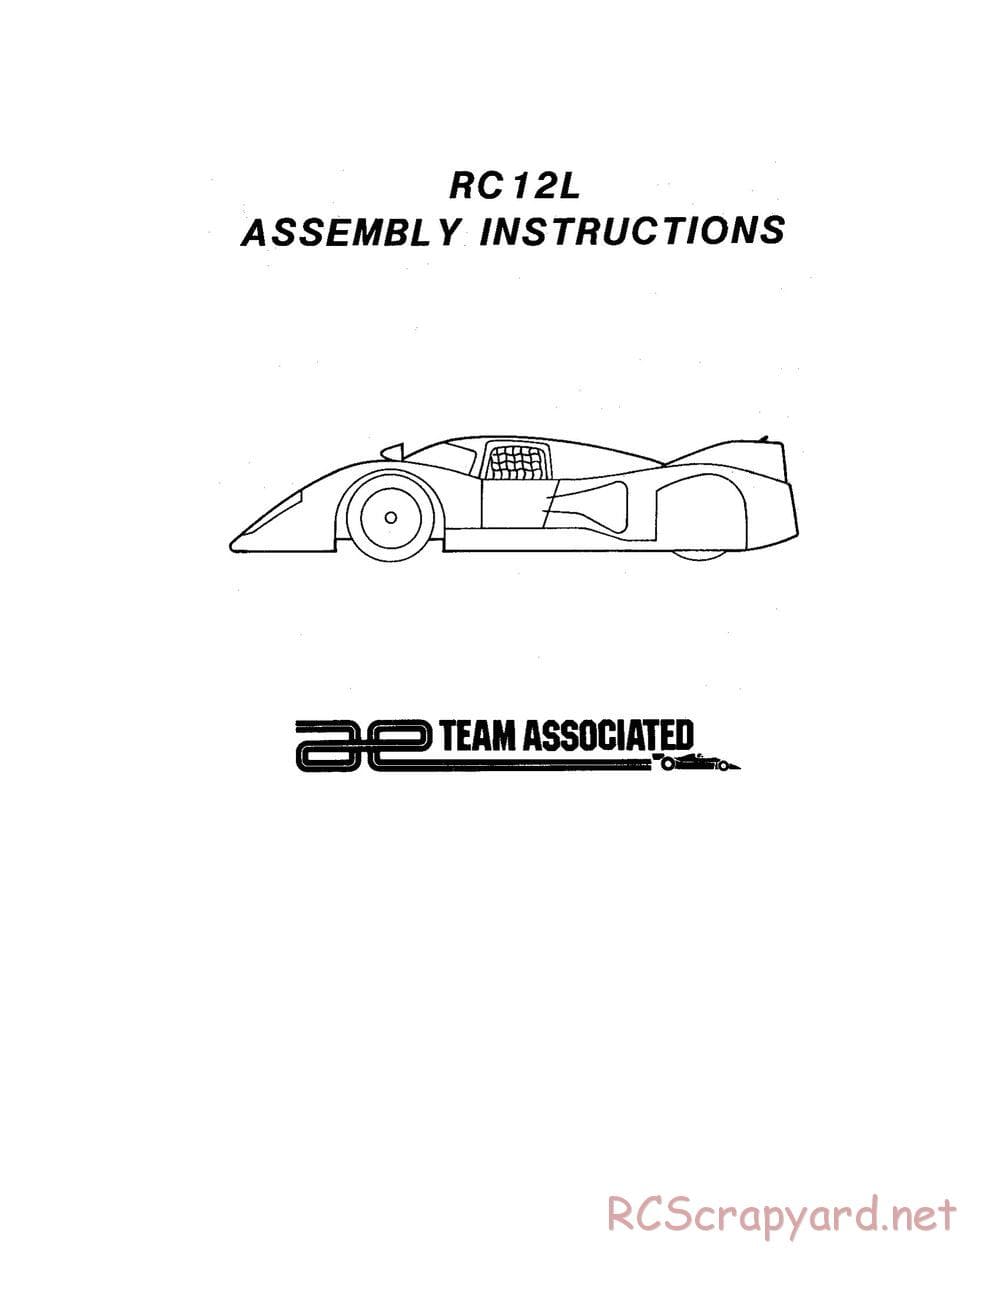 Team Associated - RC12L - Manual - Page 2